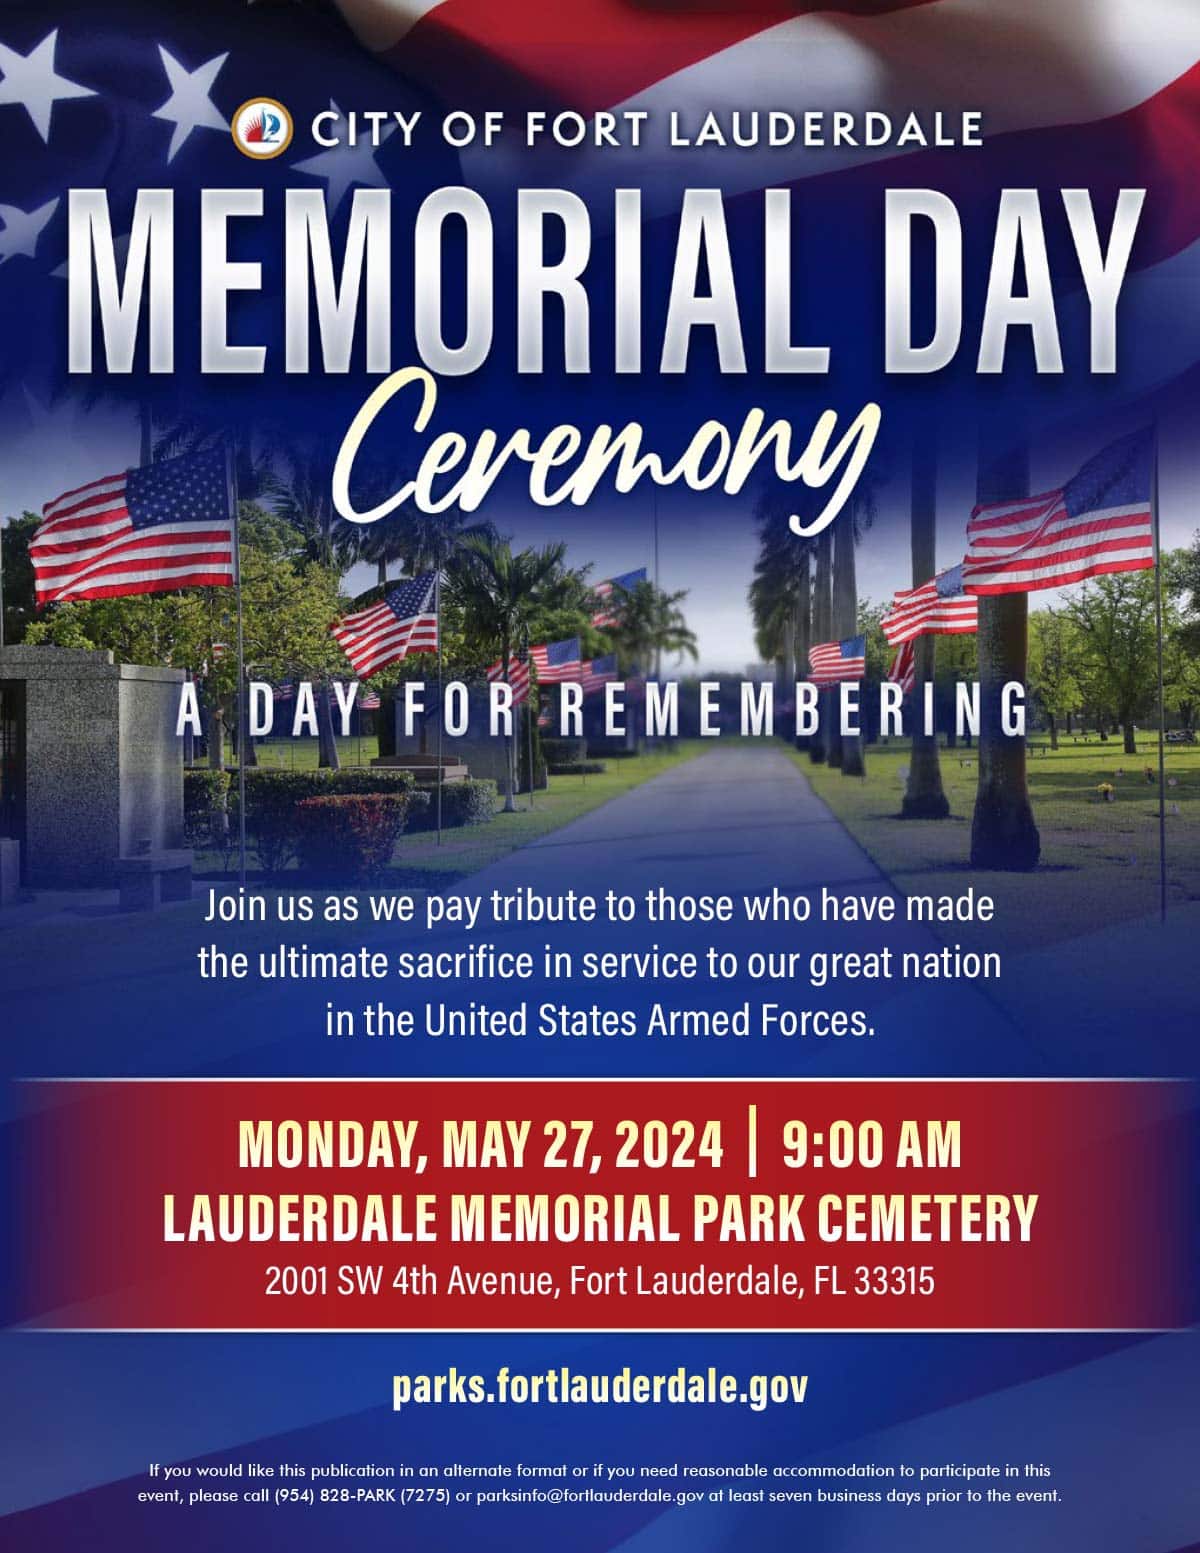 Memorial Day Ceremony - City of Fort Lauderdale - May 27, 2024